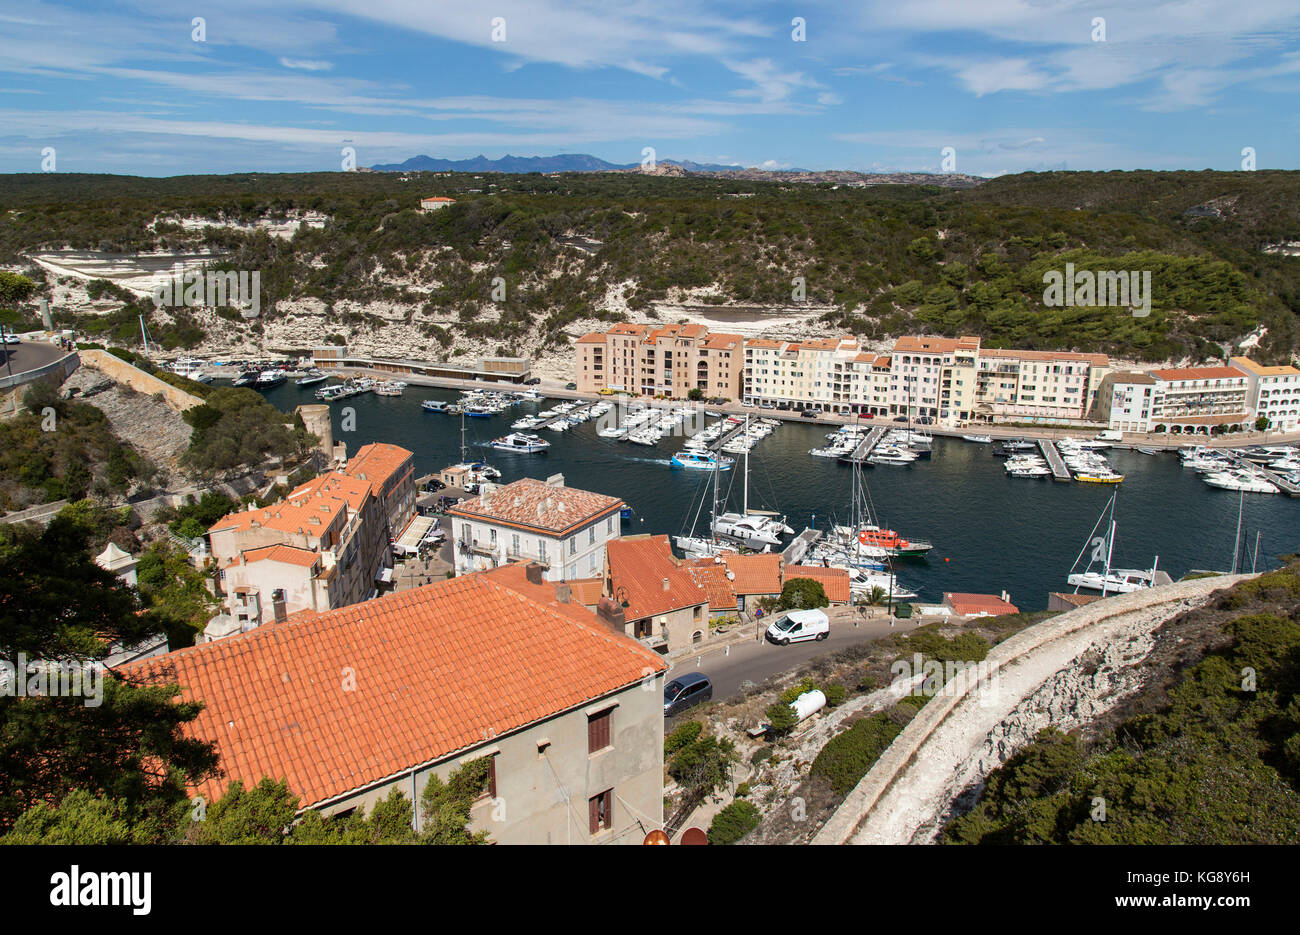 Bonifacio marina and apartments viewed from an elevated position Stock Photo